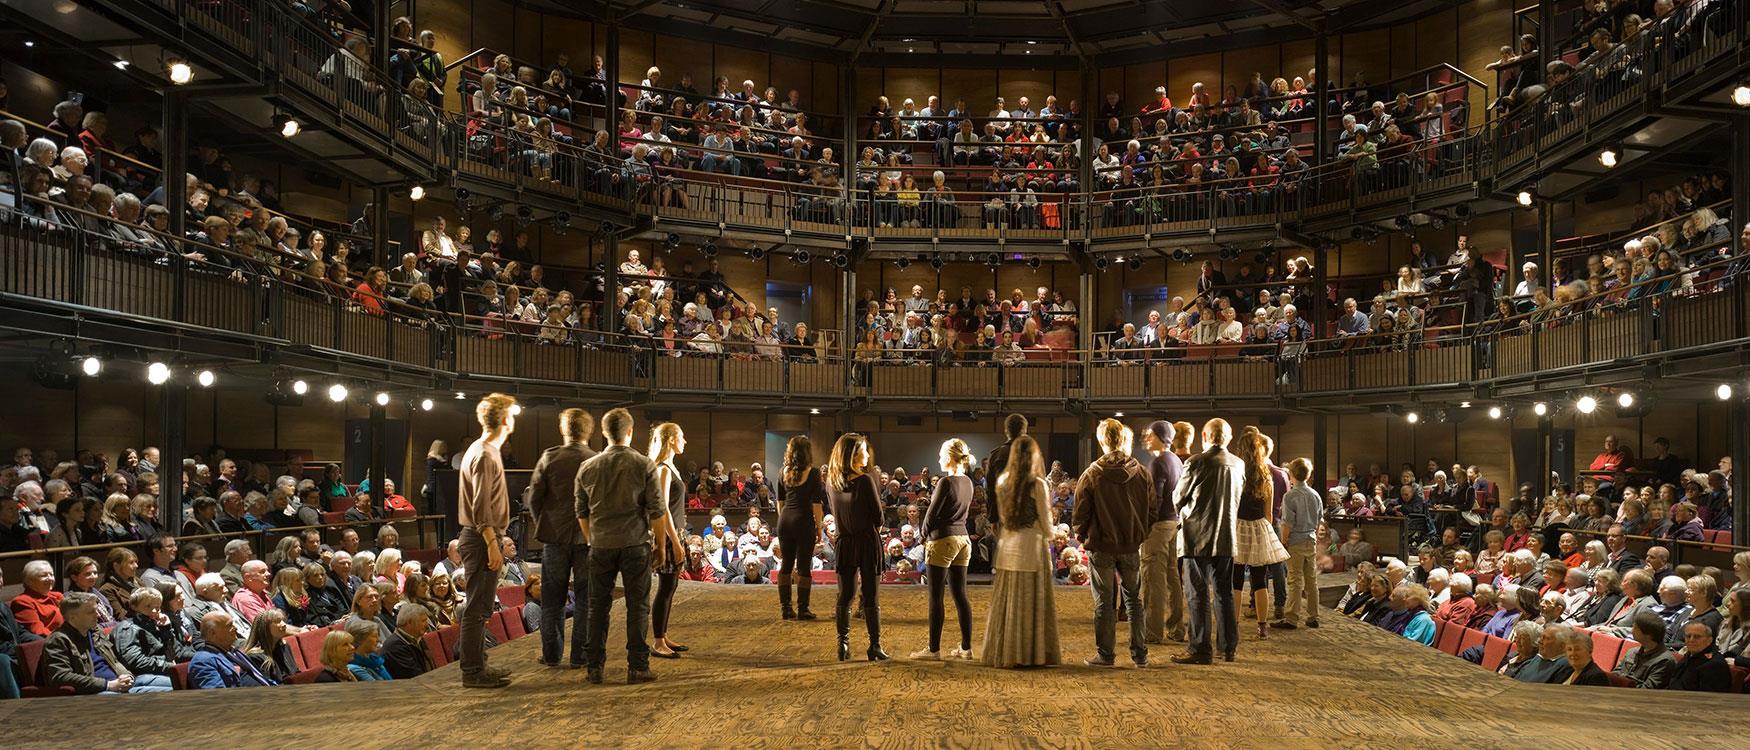 The Royal Shakespeare Theatre